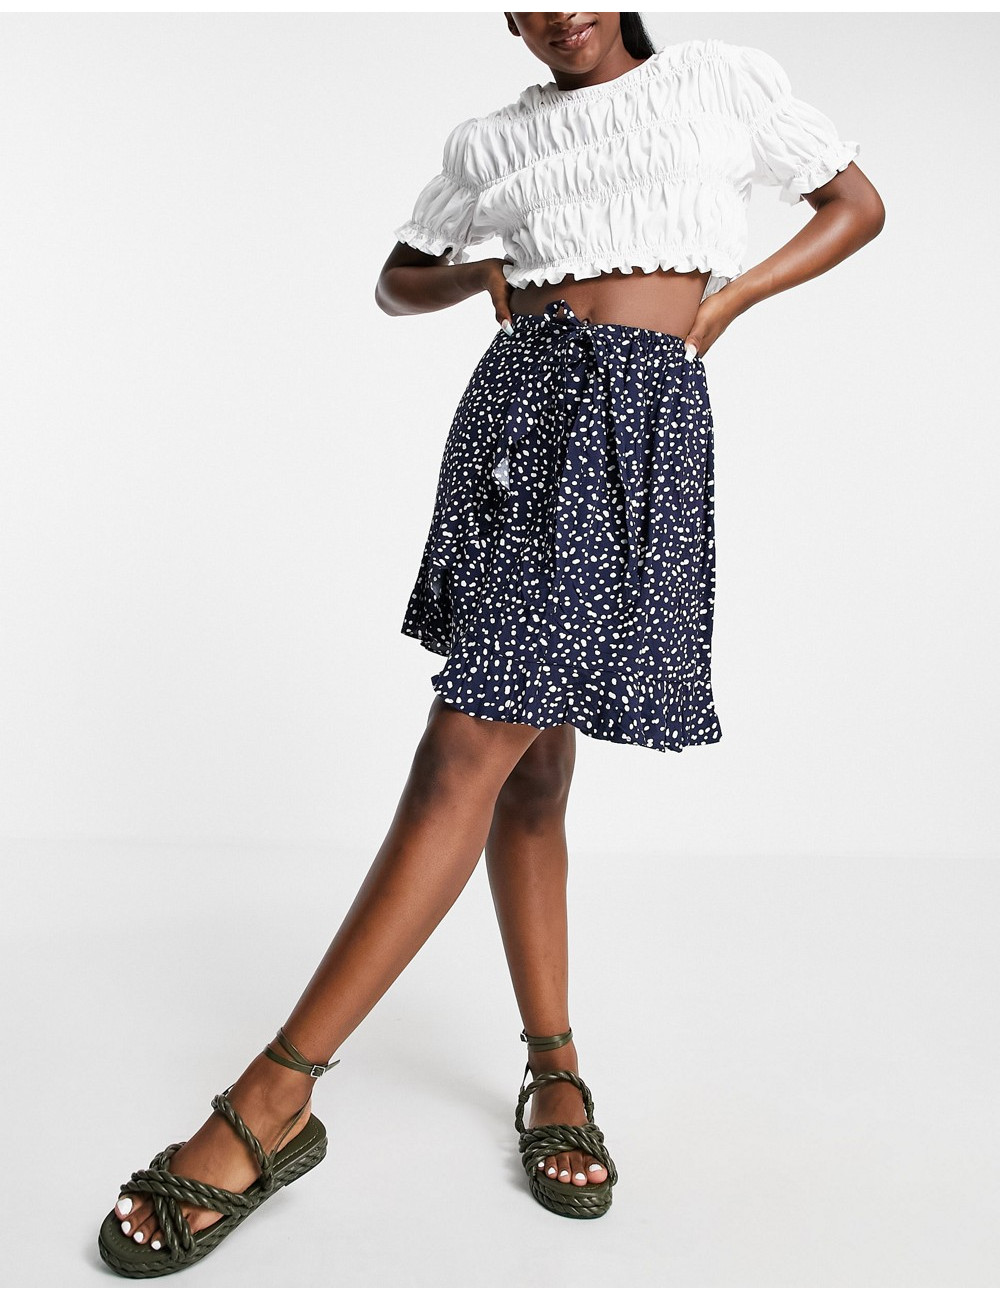 J. Crew spotted wrap skirt